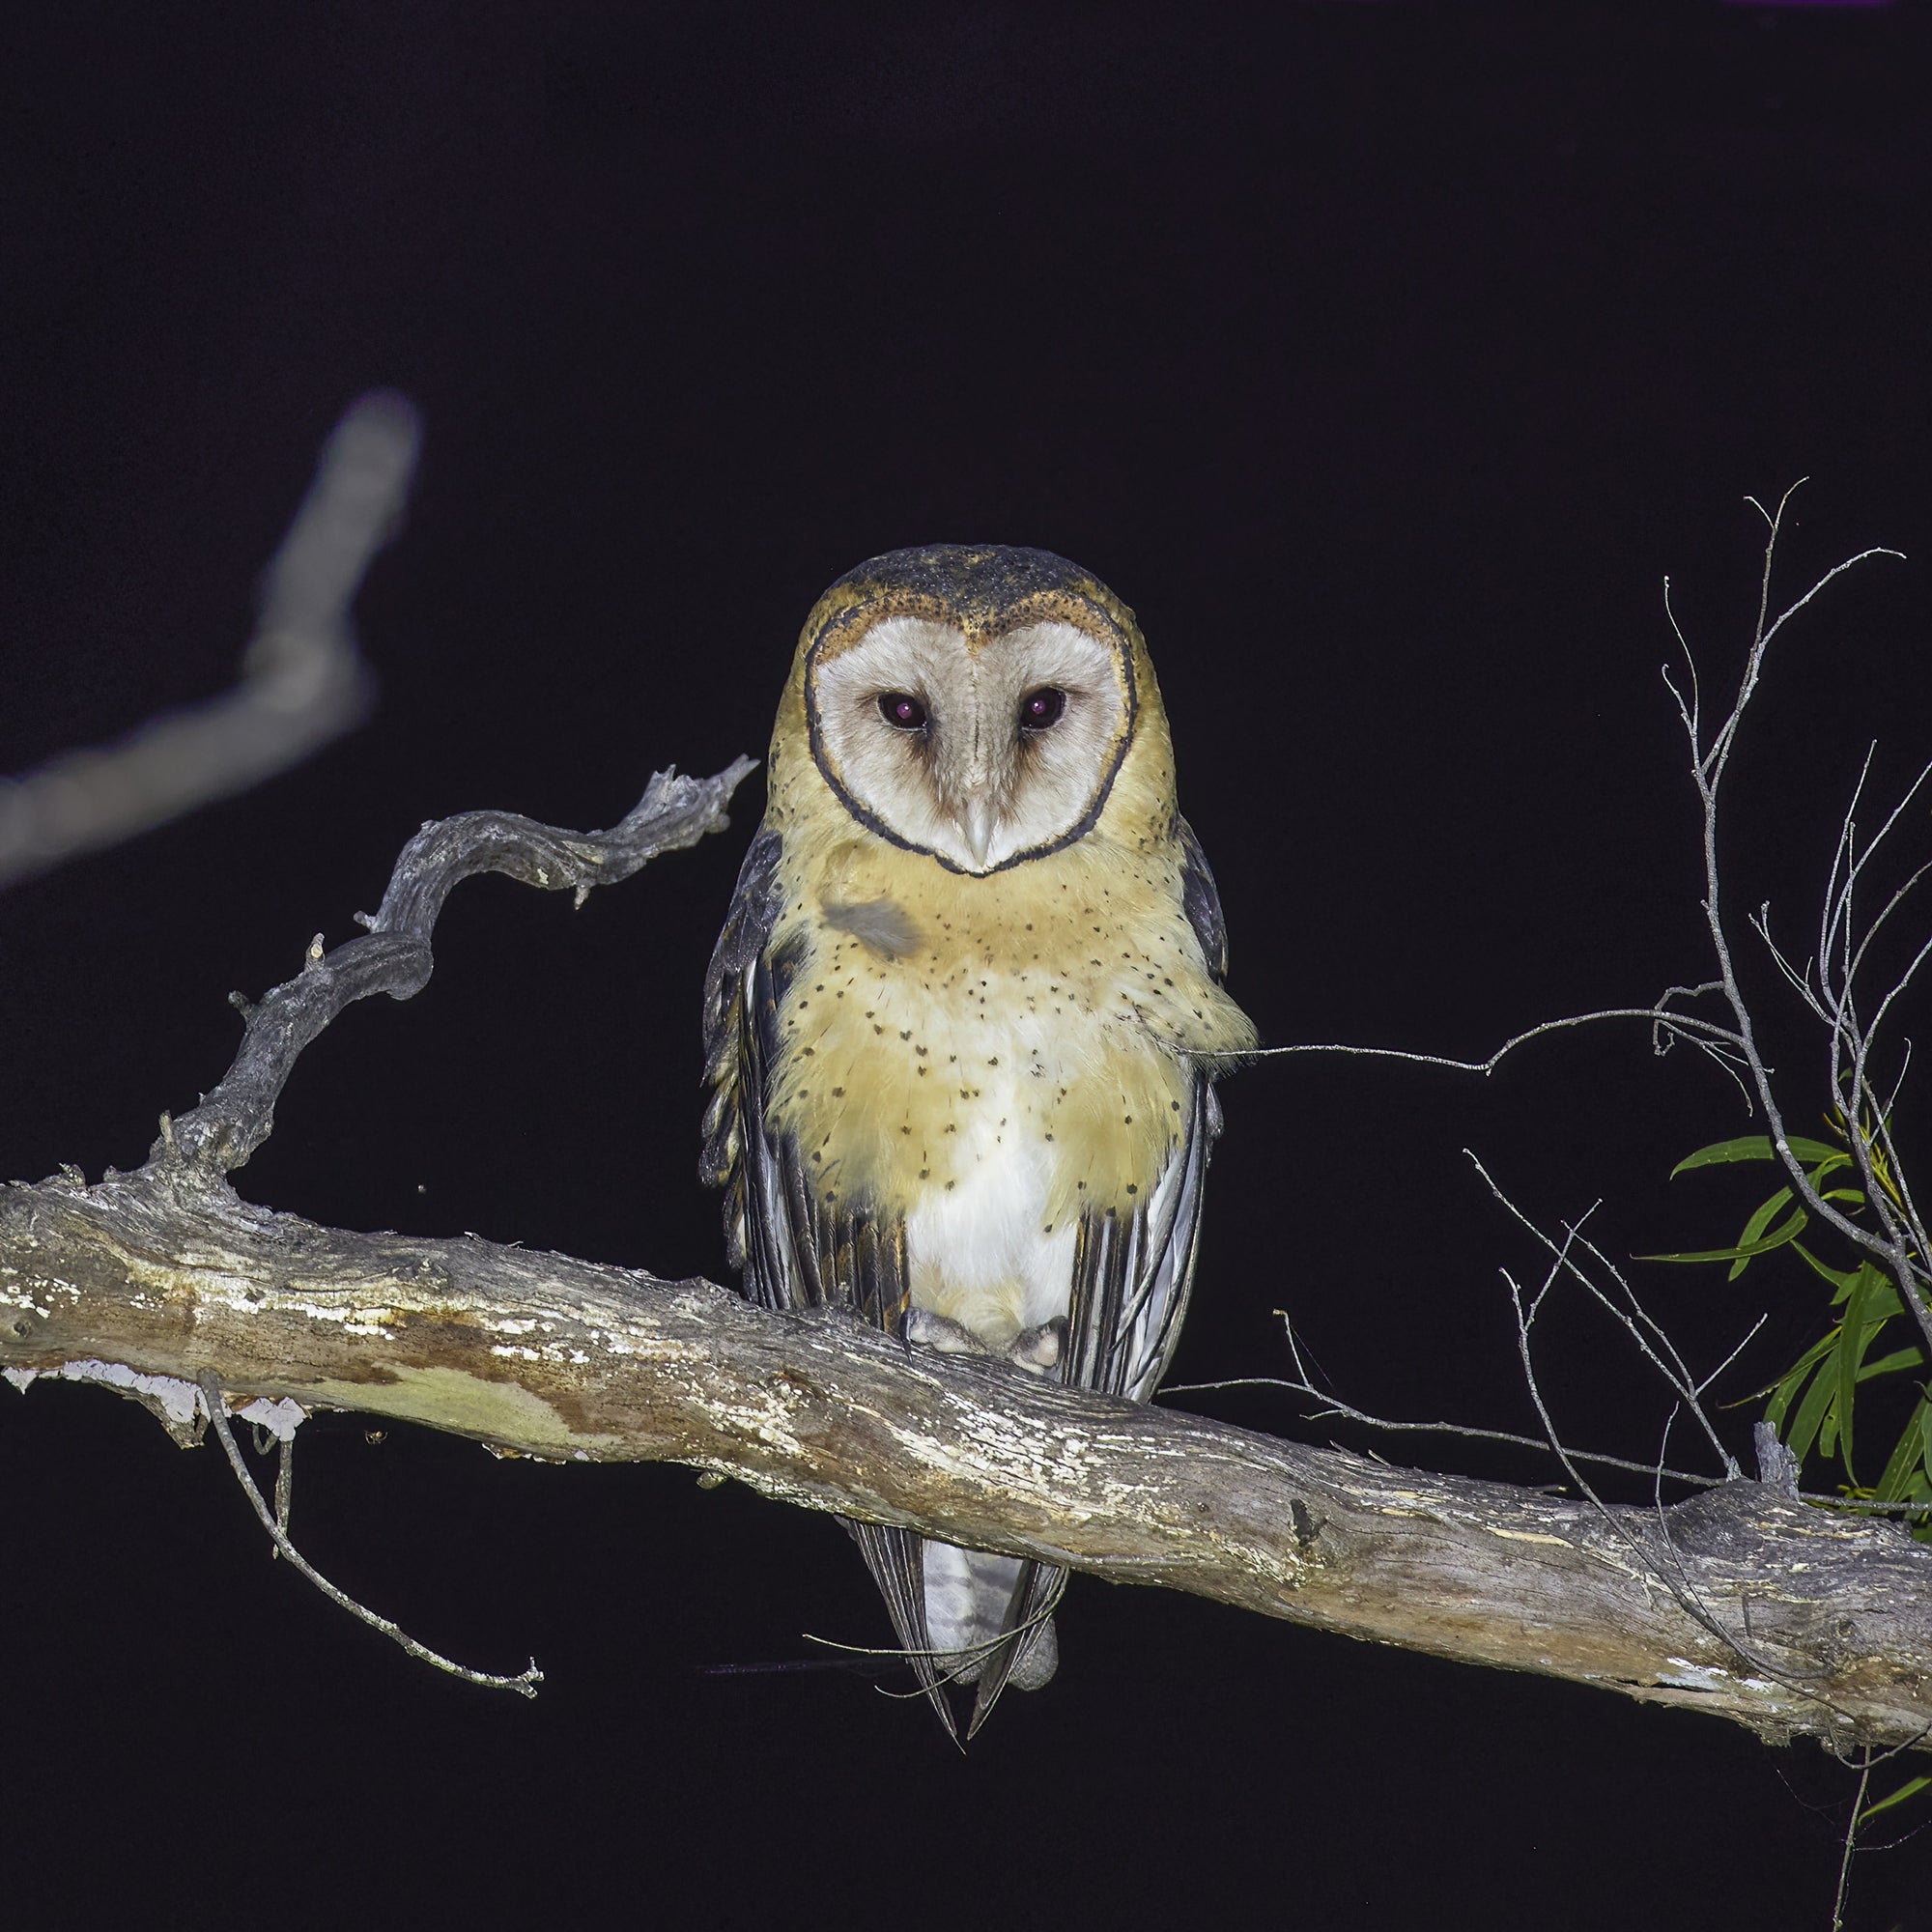 Rob Blakers - Tasmanian Masked Owl at McKimmie Creek, takayna, proposed toxic waste dump site for mining company MMG.